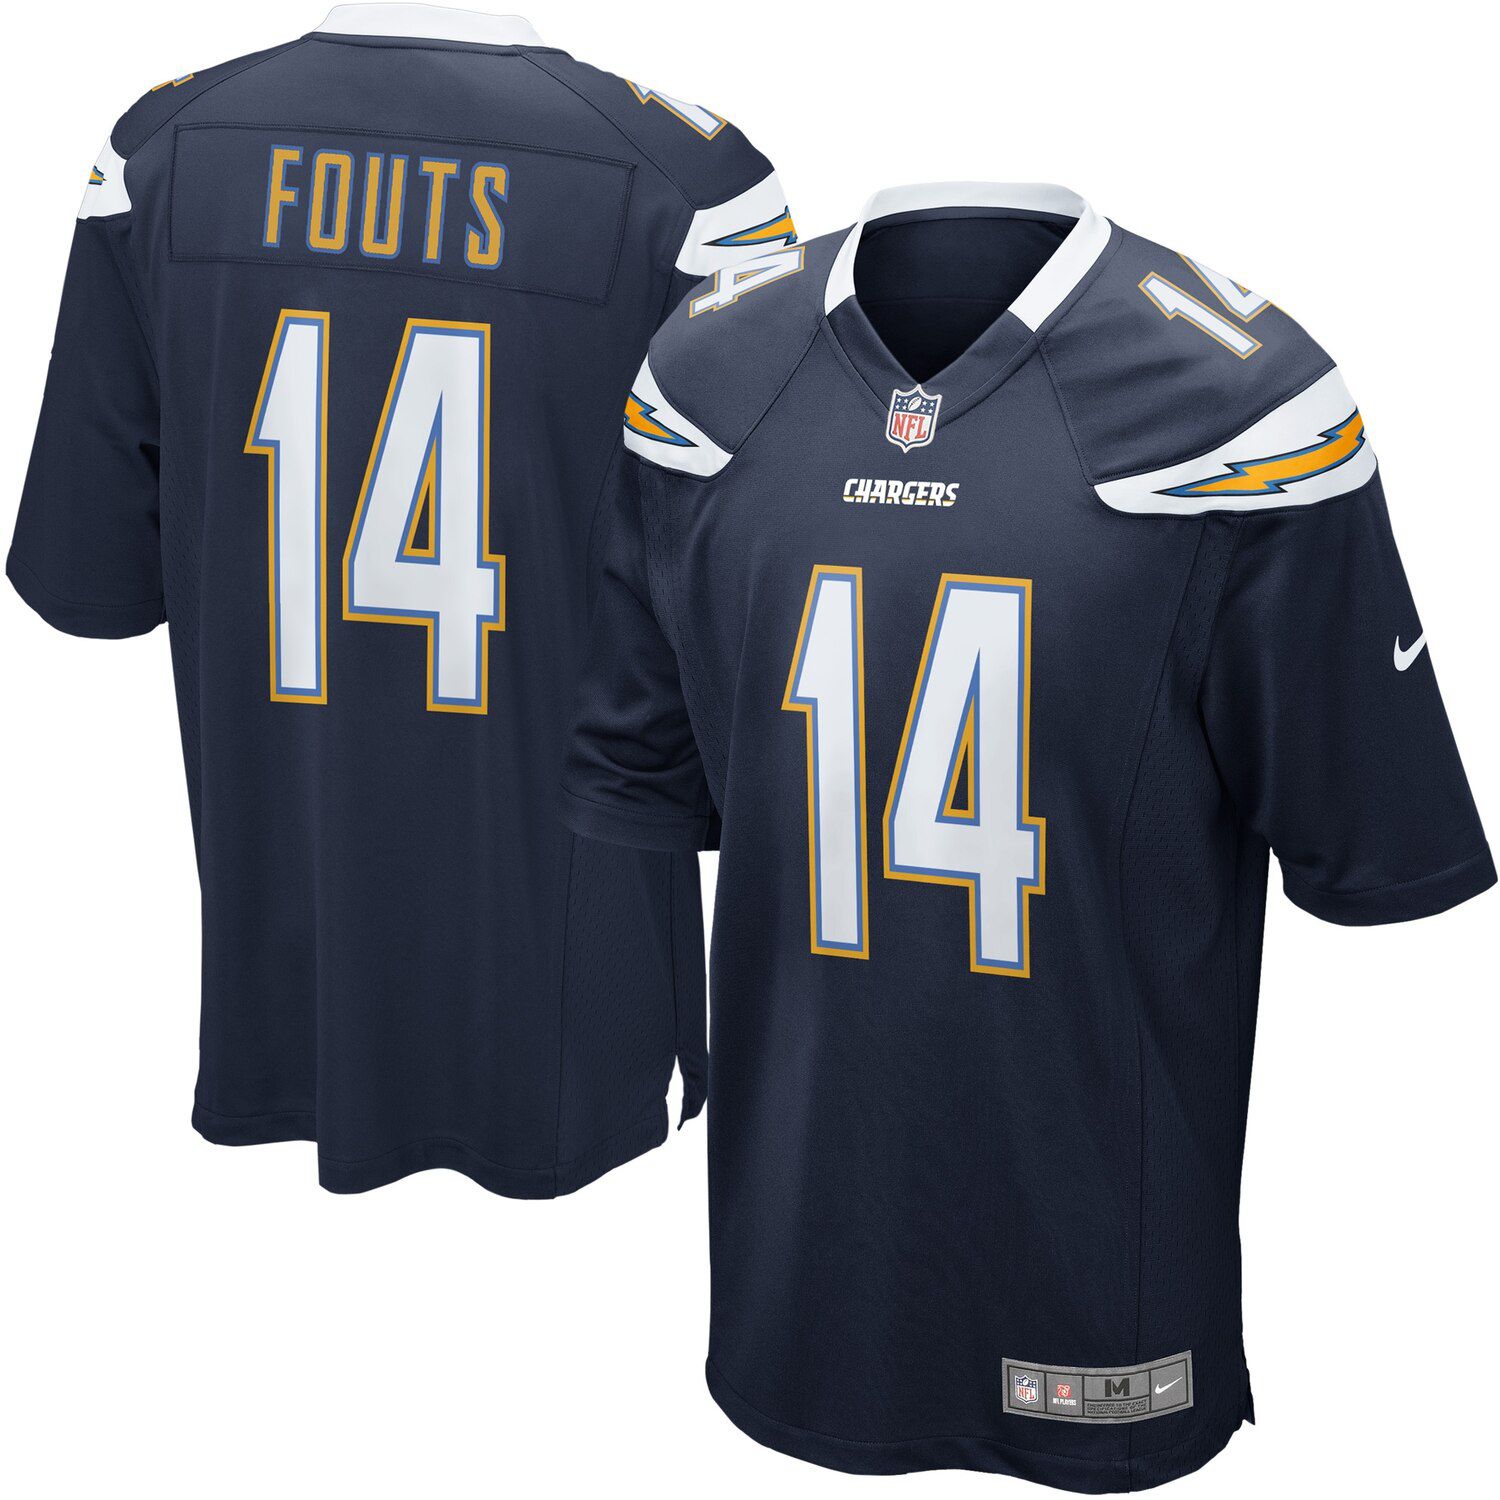 fouts jersey